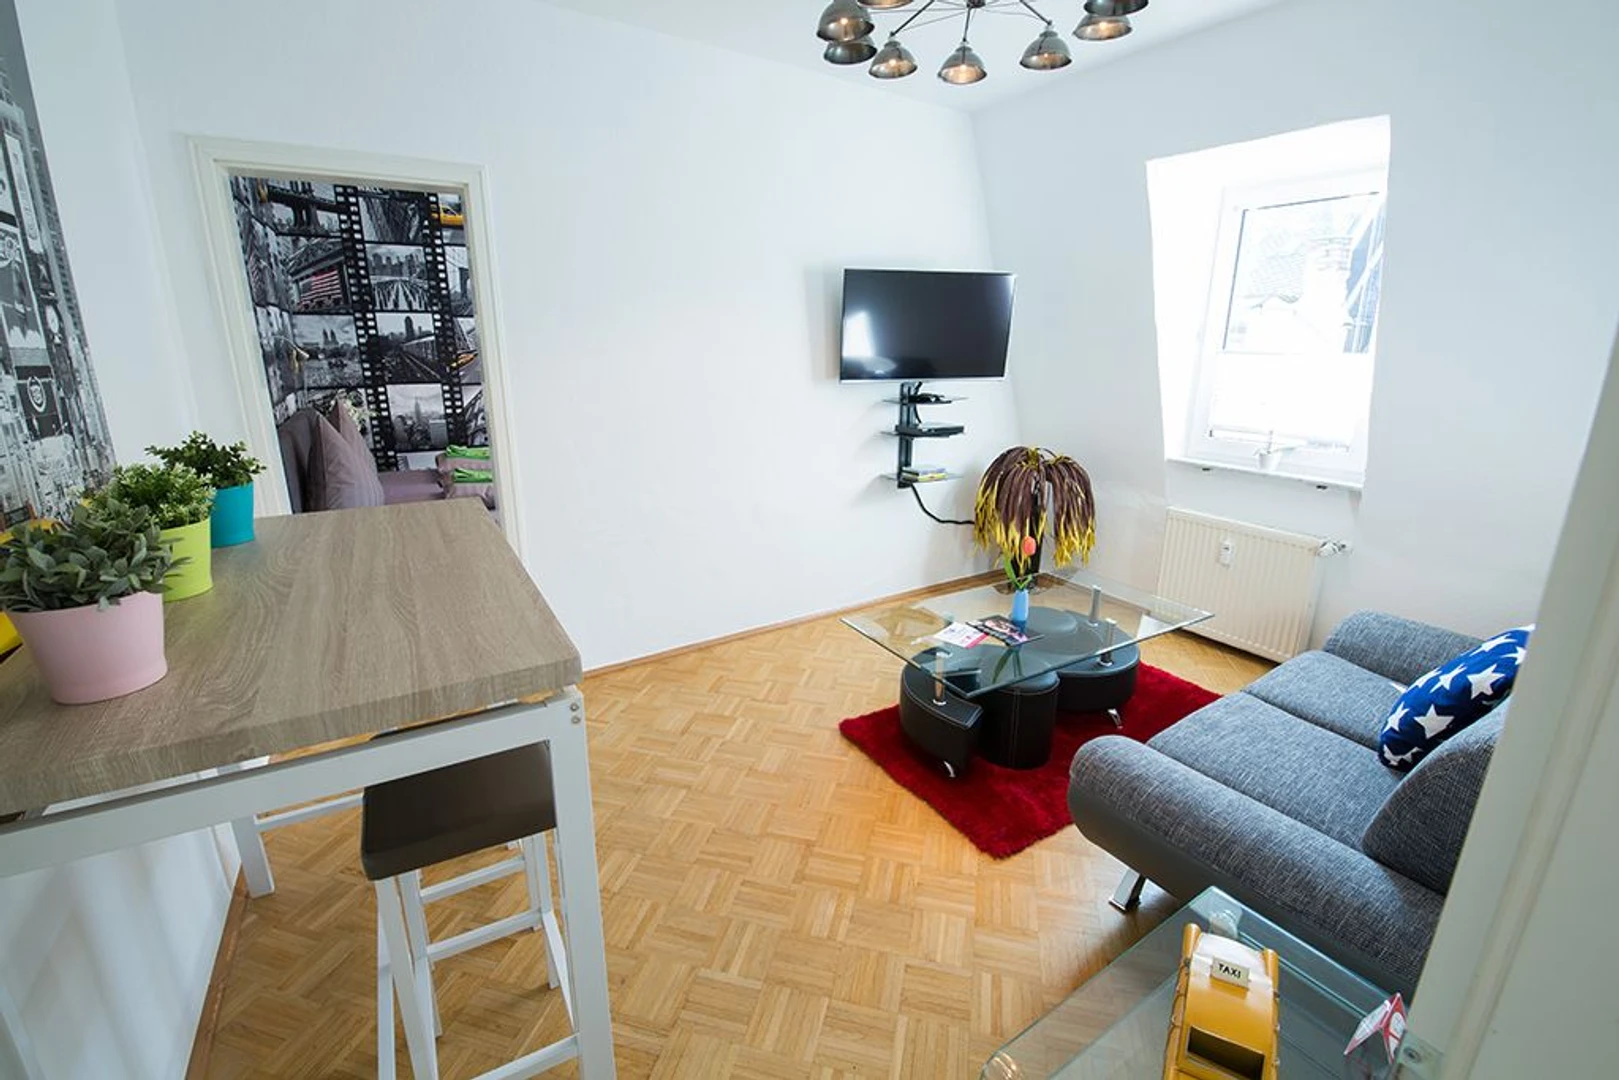 Room for rent in a shared flat in Koblenz